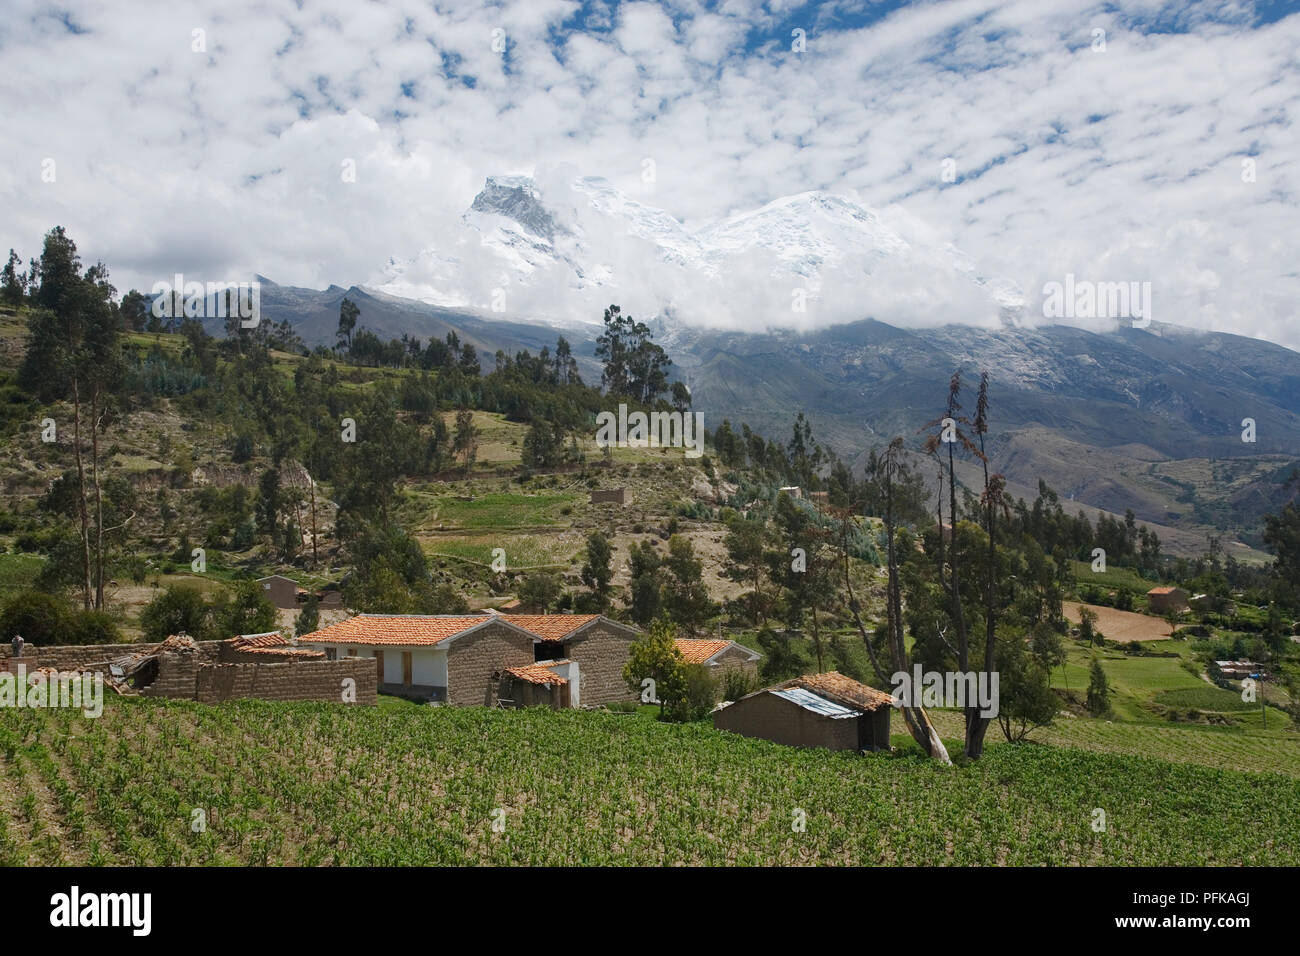 Peru, Ancash, Cordillera Blanca, mud brick houses and fields on hillside, snow-covered mountains behind clouds Stock Photo